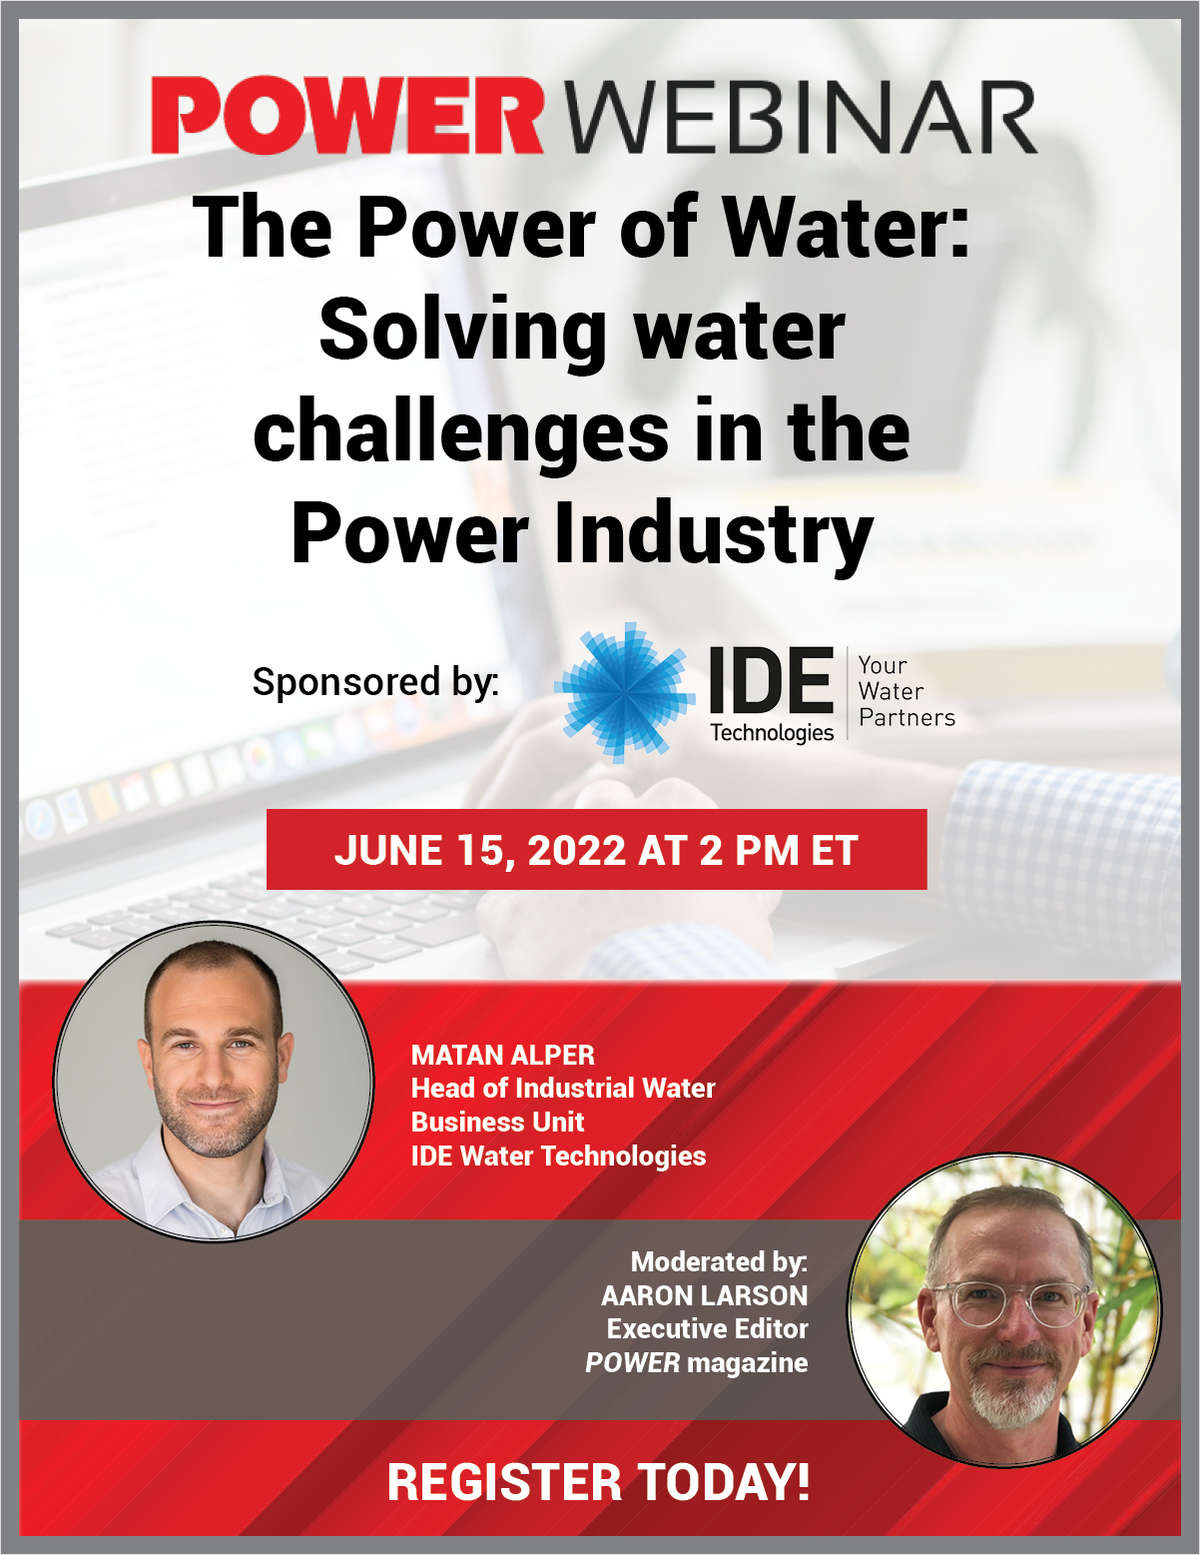 The Power of Water: Solving water challenges in the Power Industry